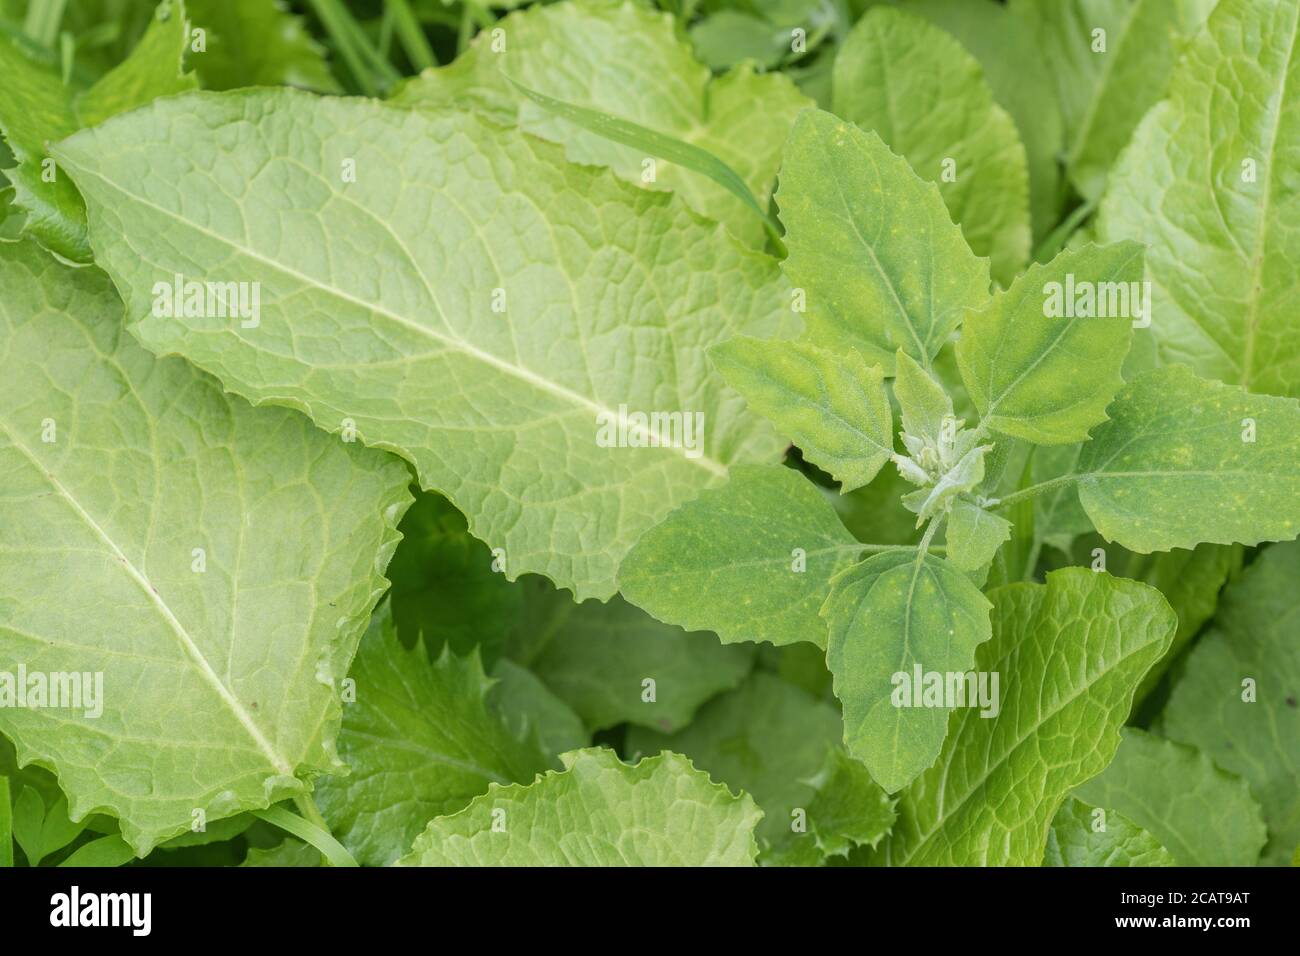 Close shot of leaves of 2 common agricultural weeds - Fat-Hen / Chenopodium album, & Broad-Leaved Dock / Rumex obtusifolius. Both can be eaten. Stock Photo